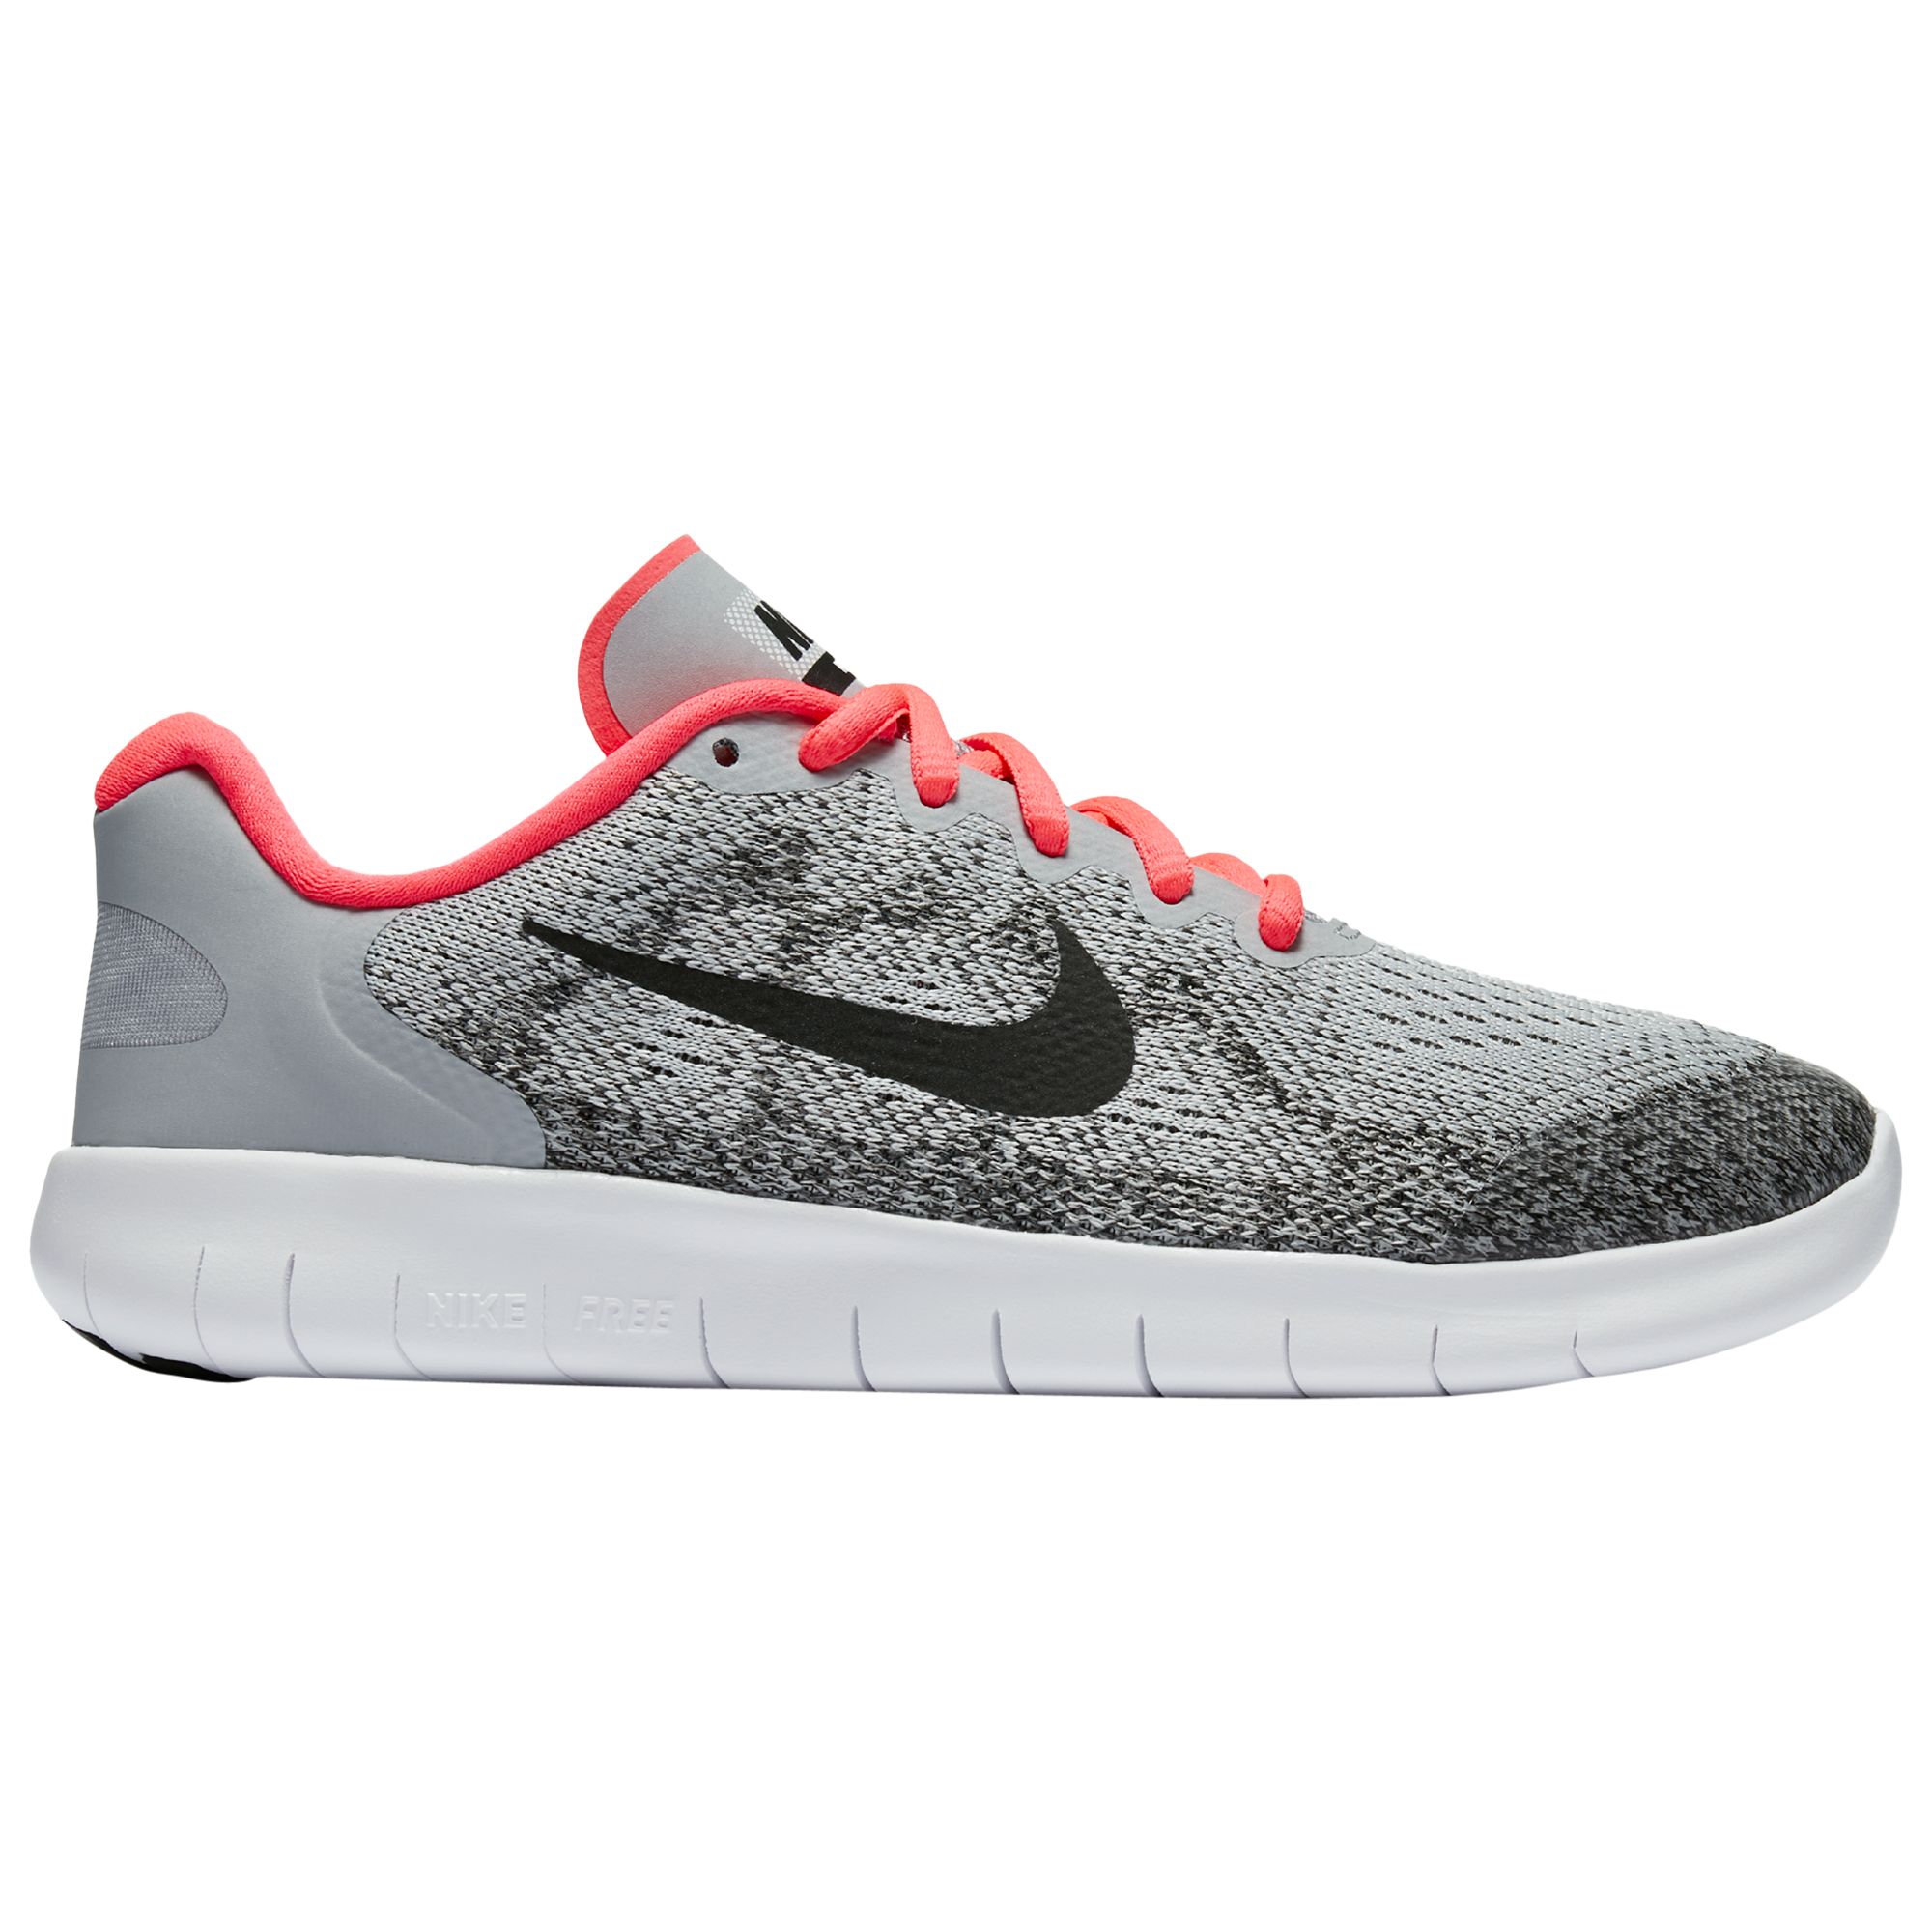 Nike Children's Free Run 2 Lace Up Trainers, Grey/Pink, 3